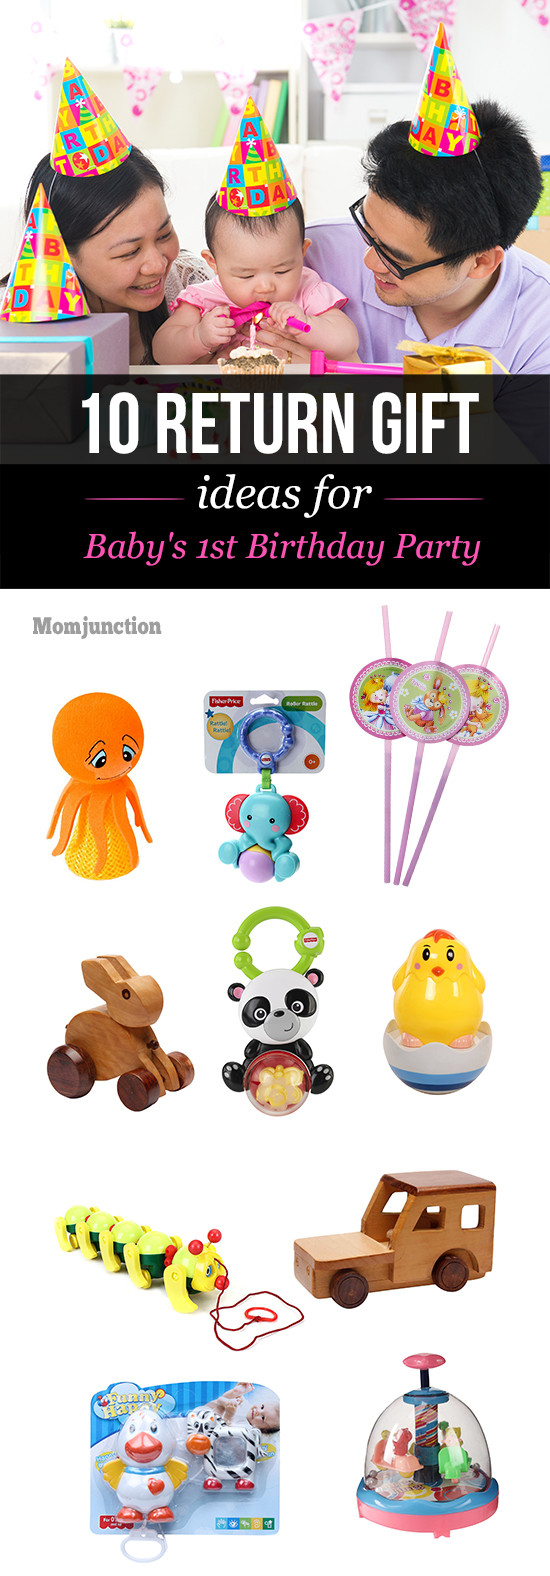 Return Gift Ideas For 1st Birthday
 32 Thoughtful Return Gift Ideas For 1st Birthday